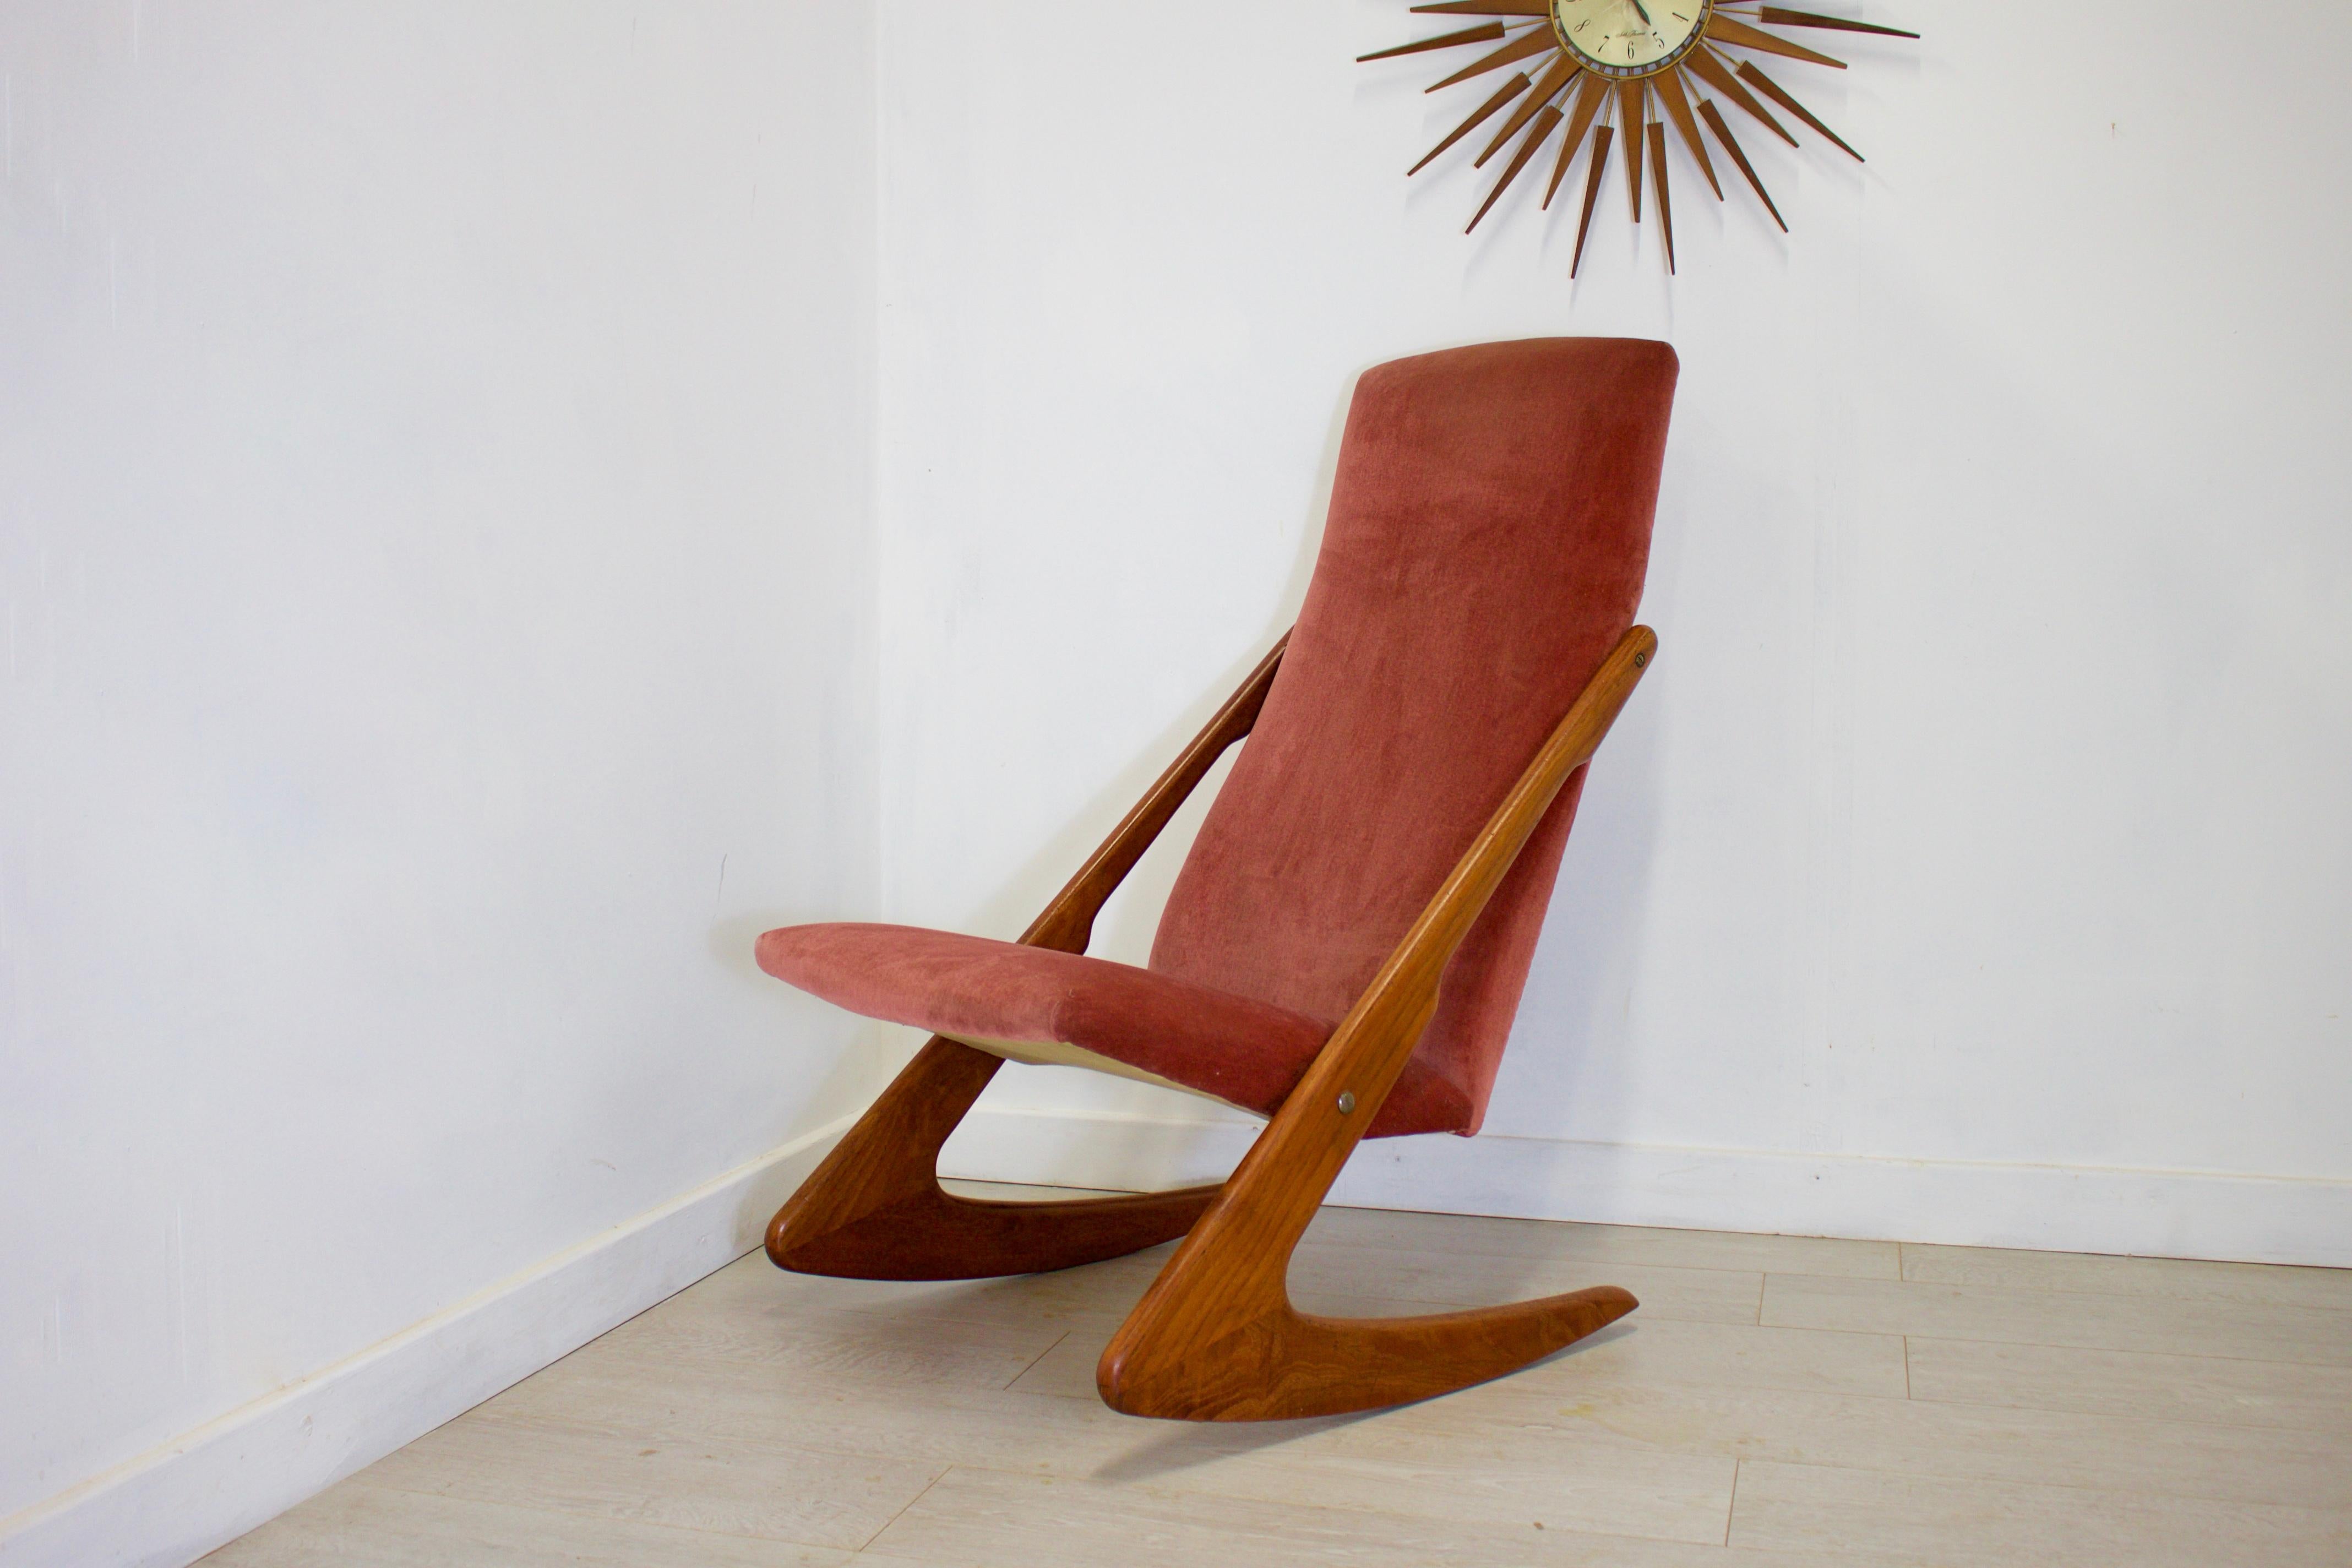 - Mid-Century Modern armchair
- Made in Denmark by Mogens Kold
- Made from teak and velour.